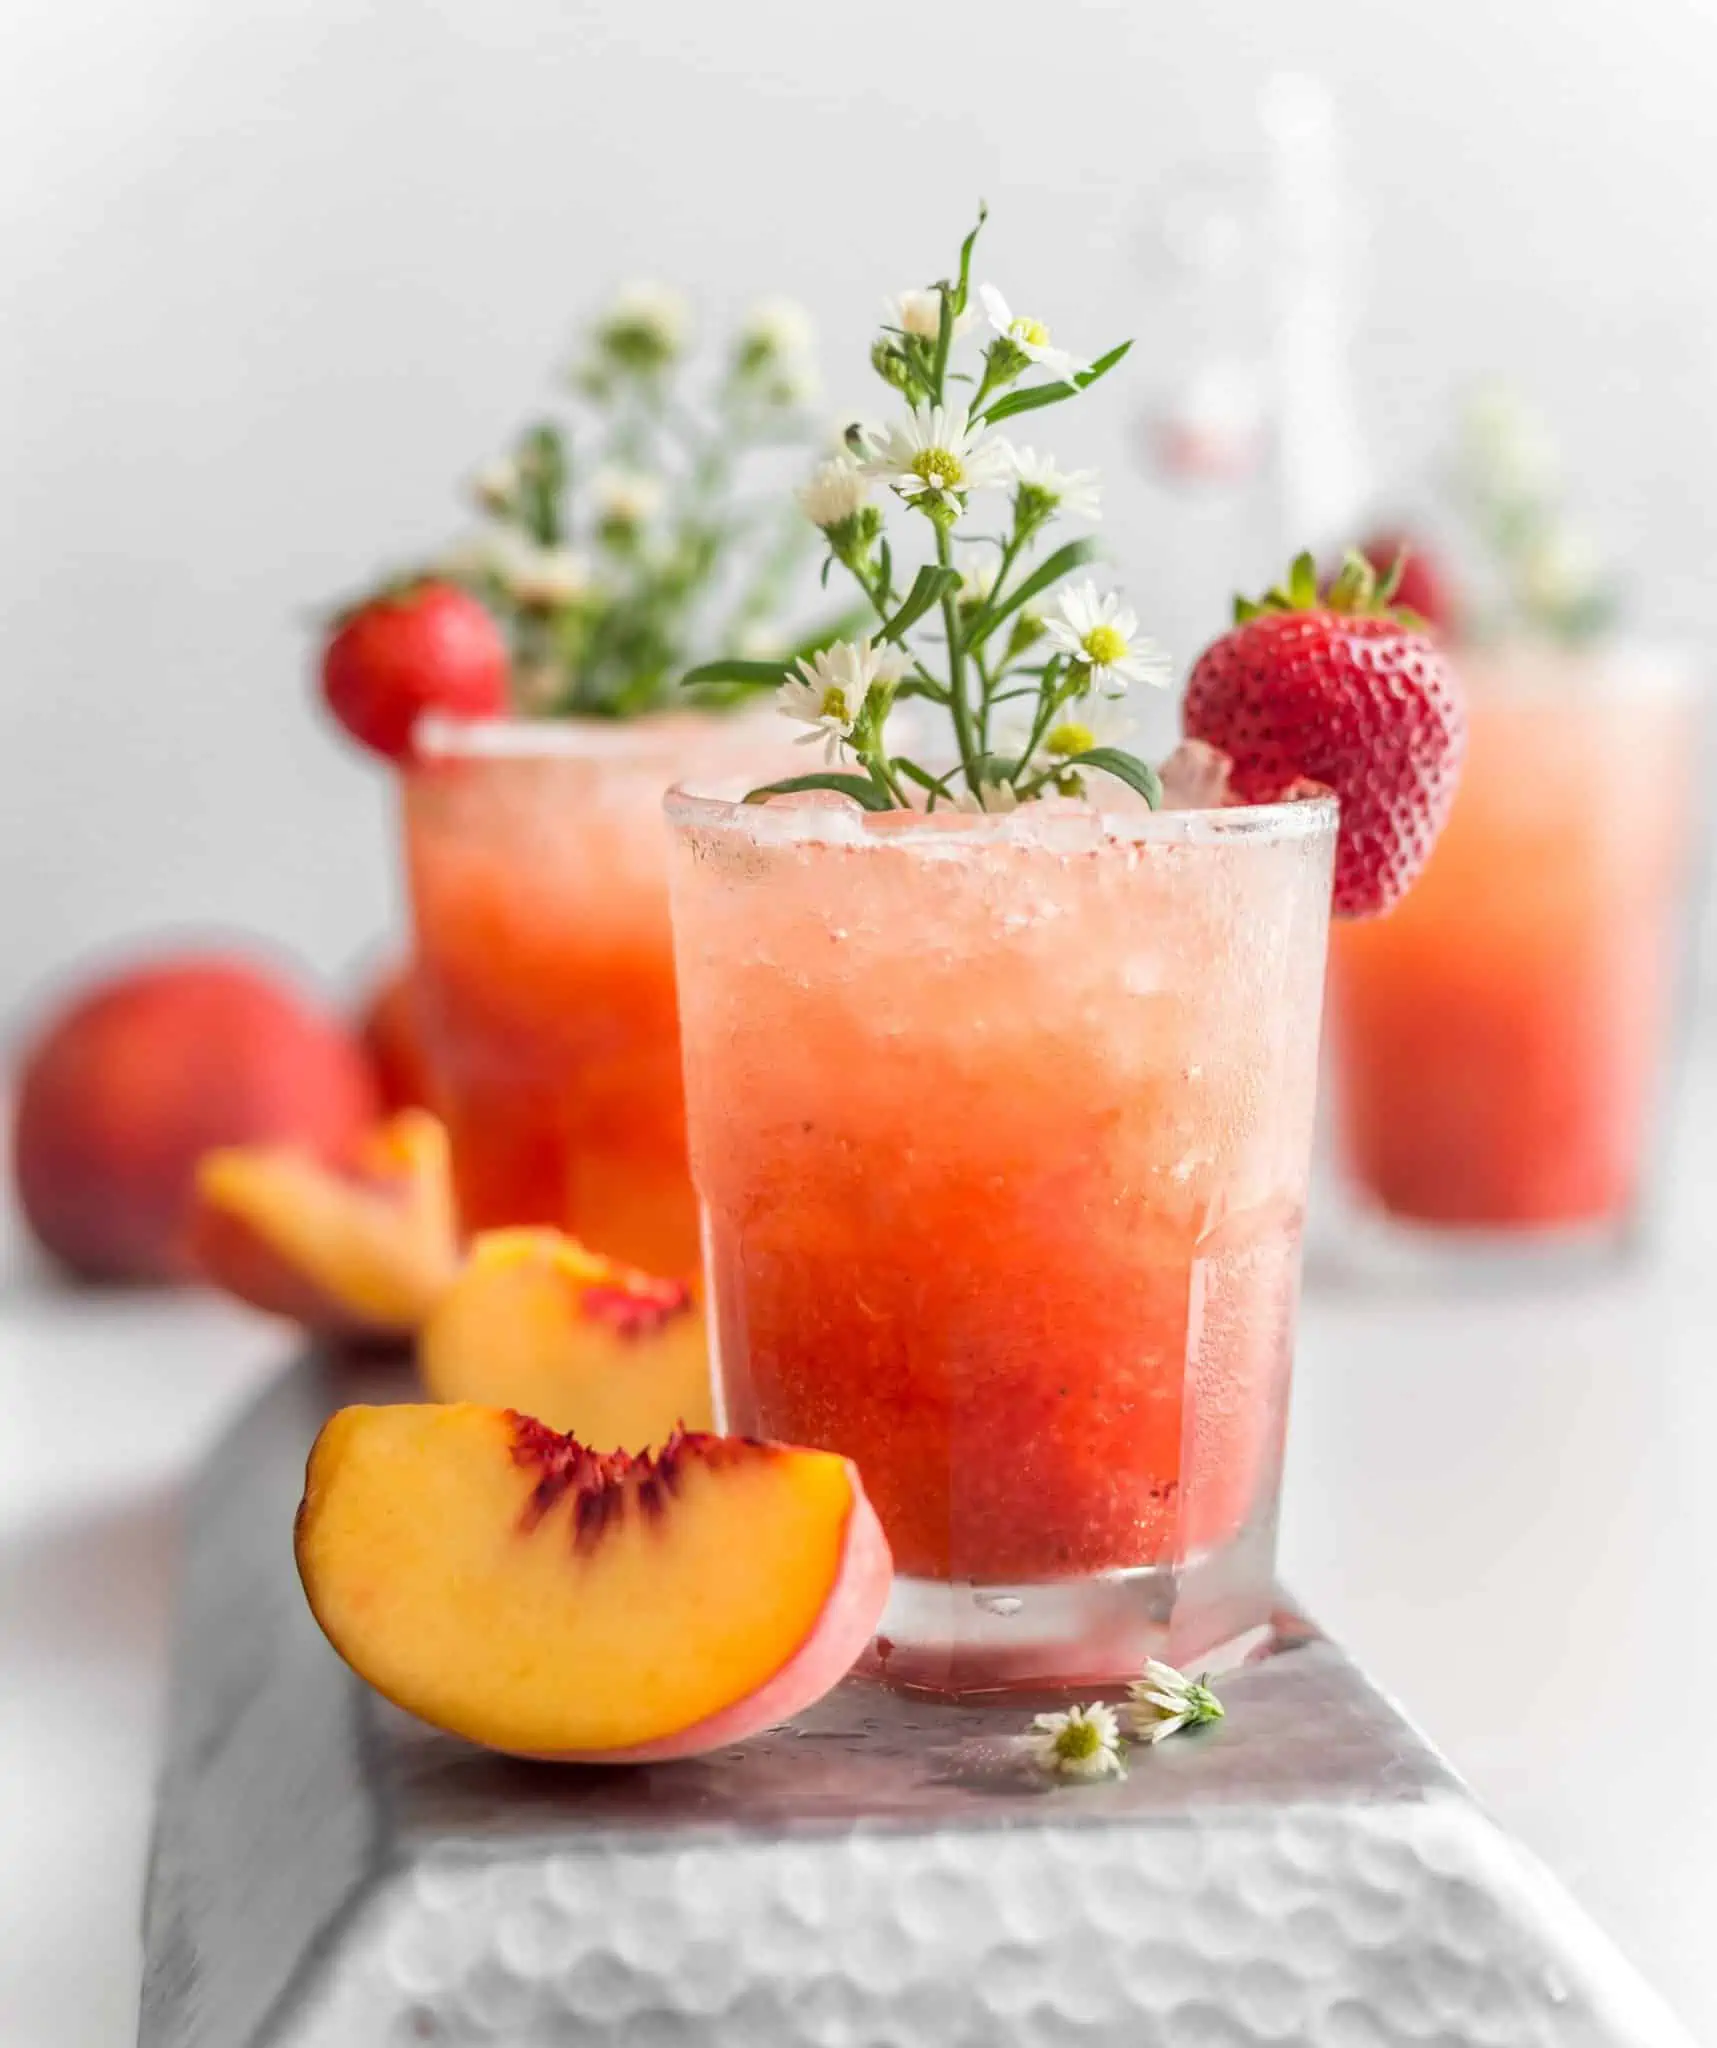 Bubbly Strawberry Peach Sprirtzer Drink Garnished With Chamomile Flowers